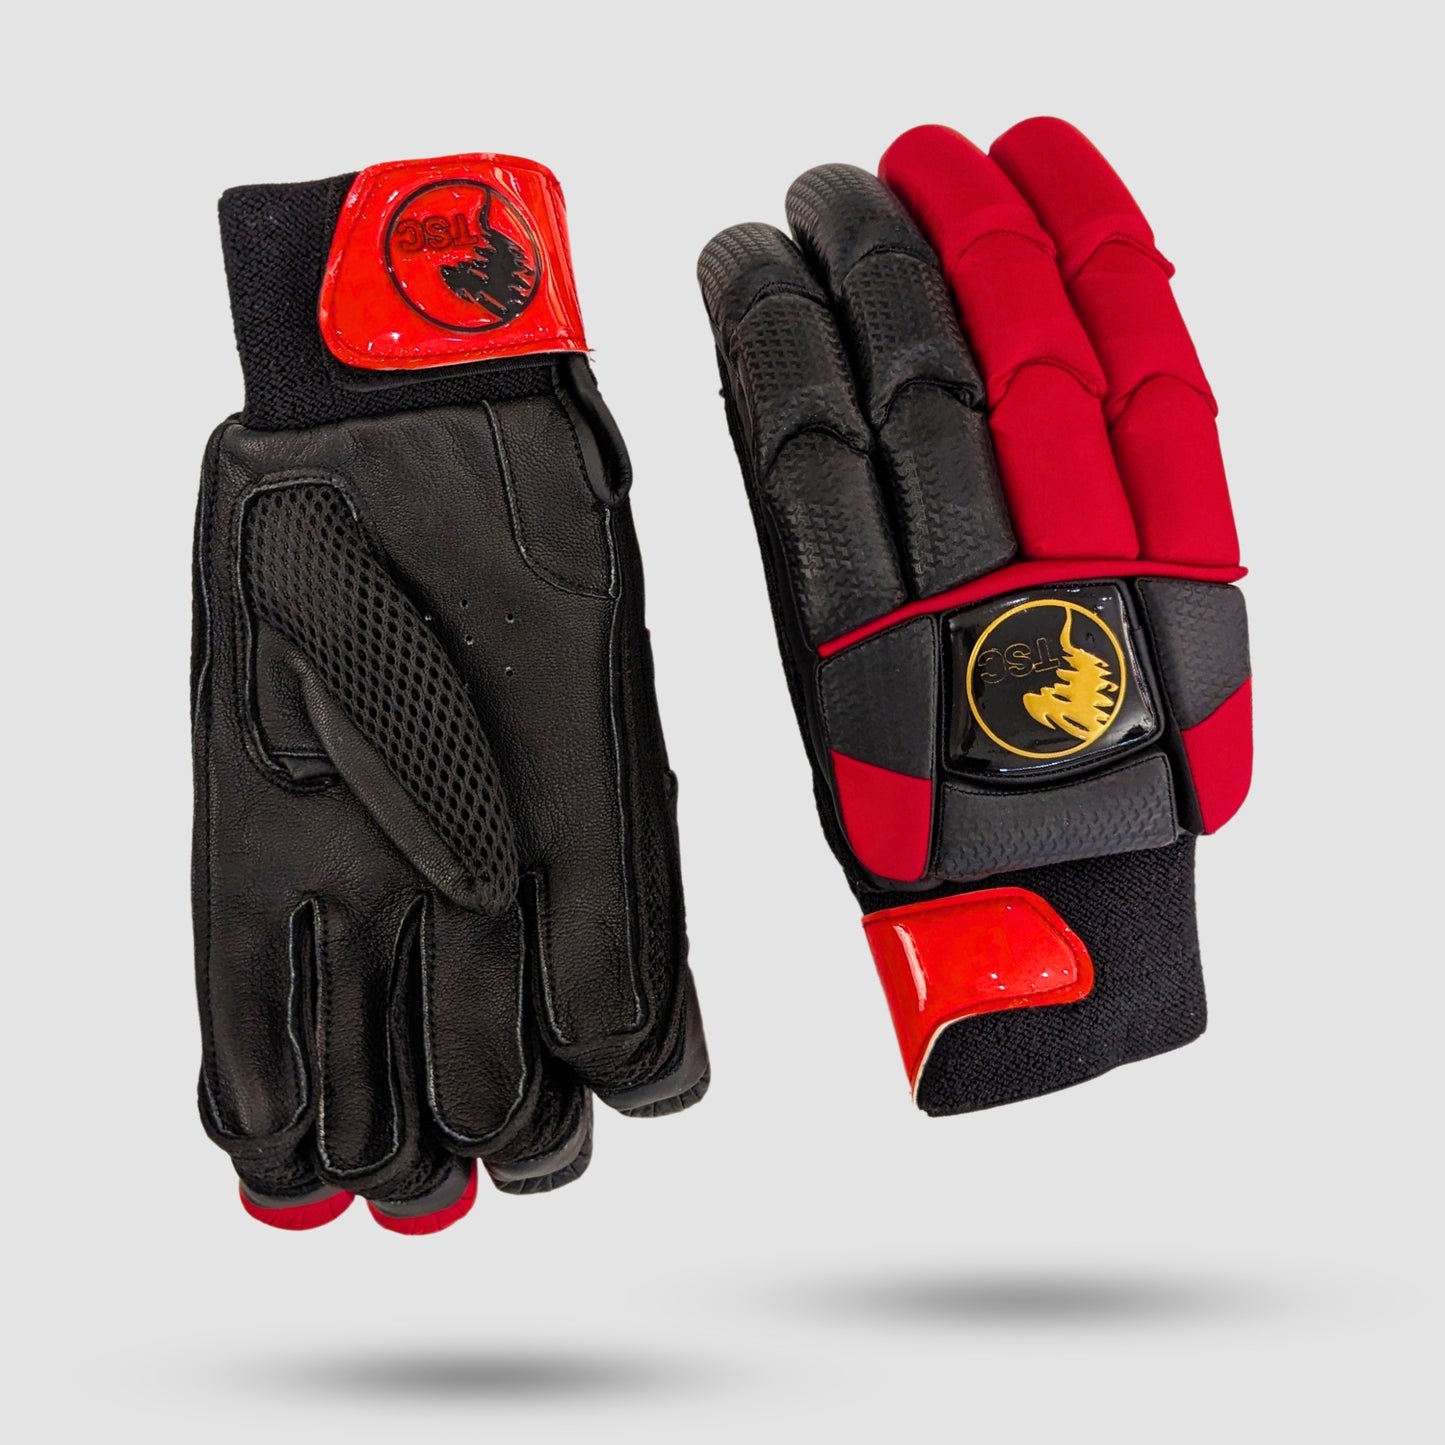 cricket color cricket gloves back and front with black leather palm cricketers gloves